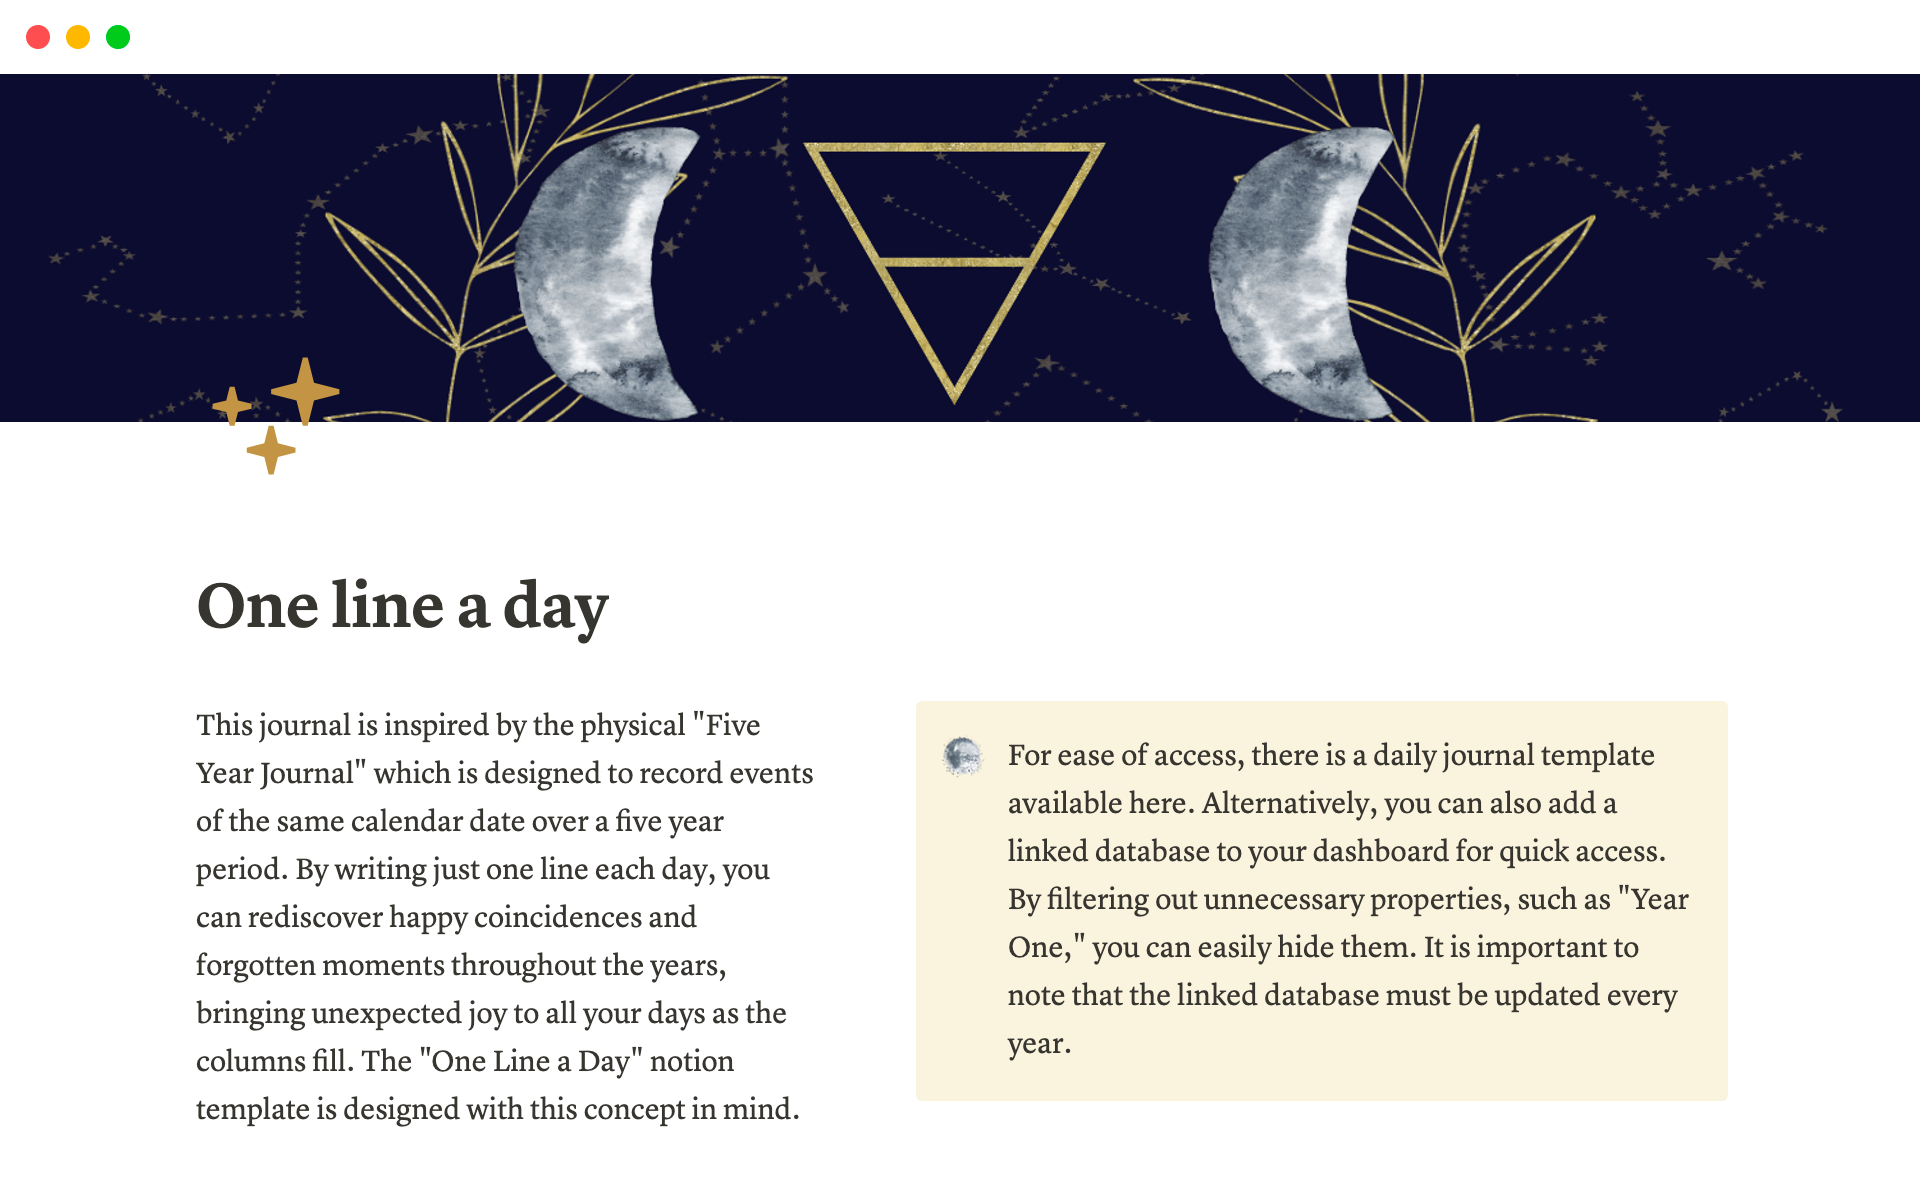 This journal is inspired by the physical "Five Year Journal" which is designed to record events of the same calendar date over a five year period.